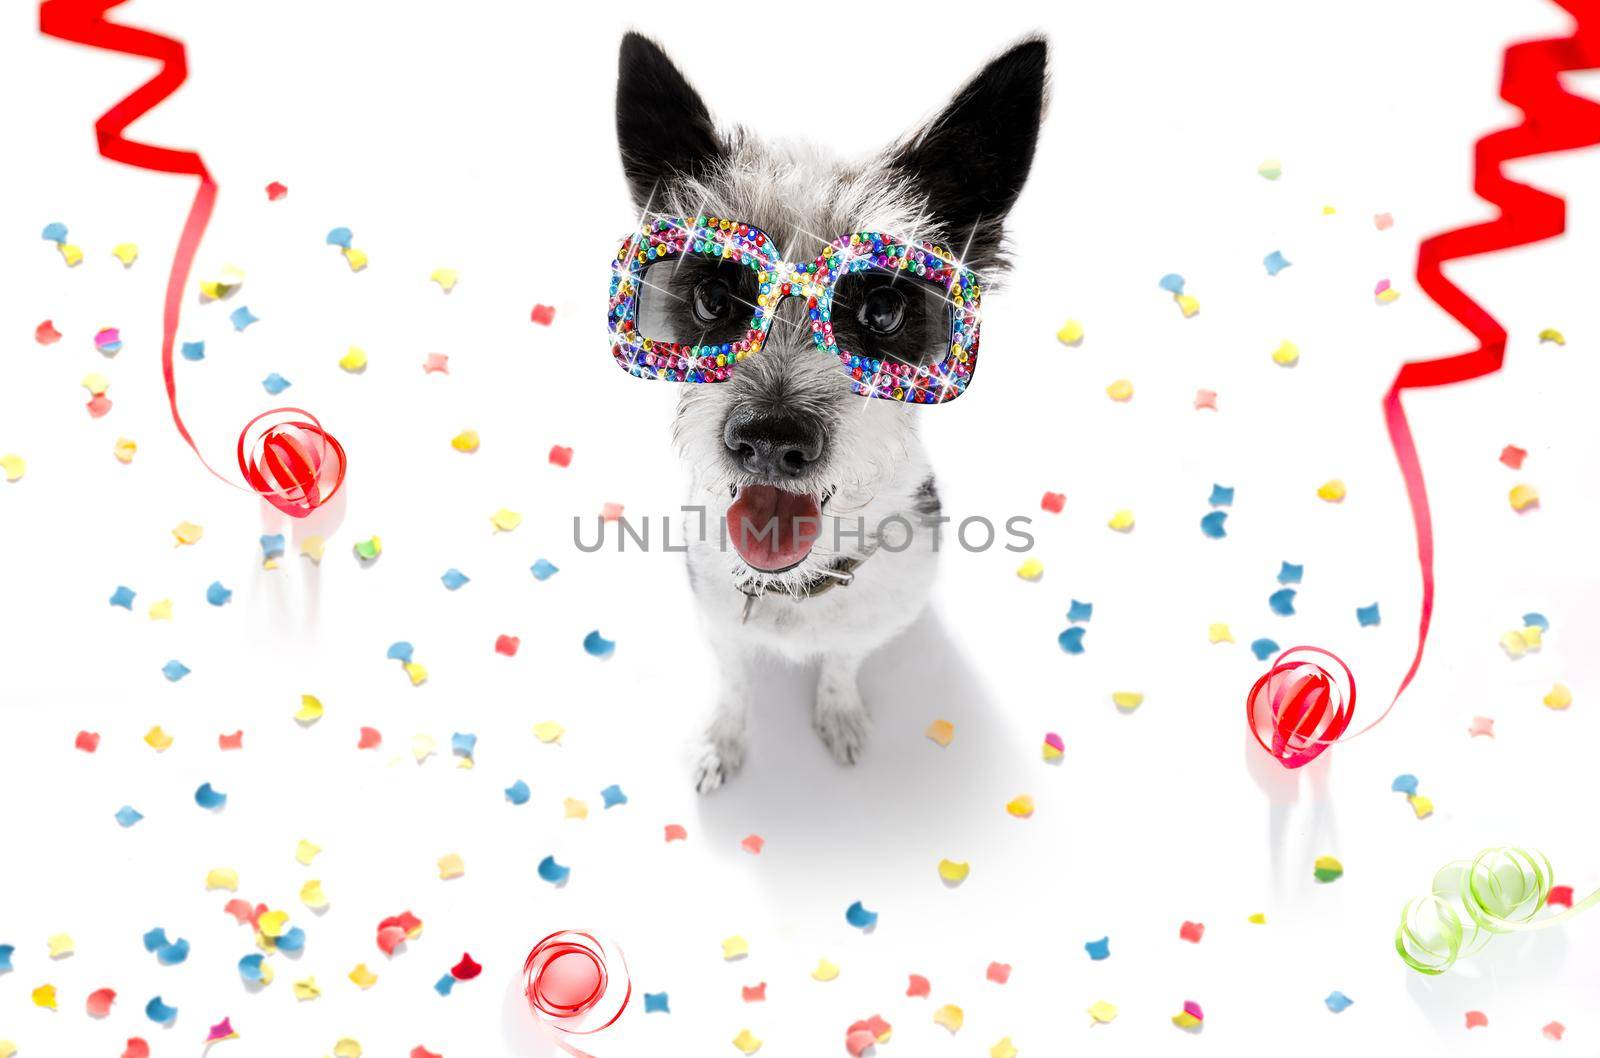 dog  in love for valentines or birthday  with red heart  balloon, isolated on white background